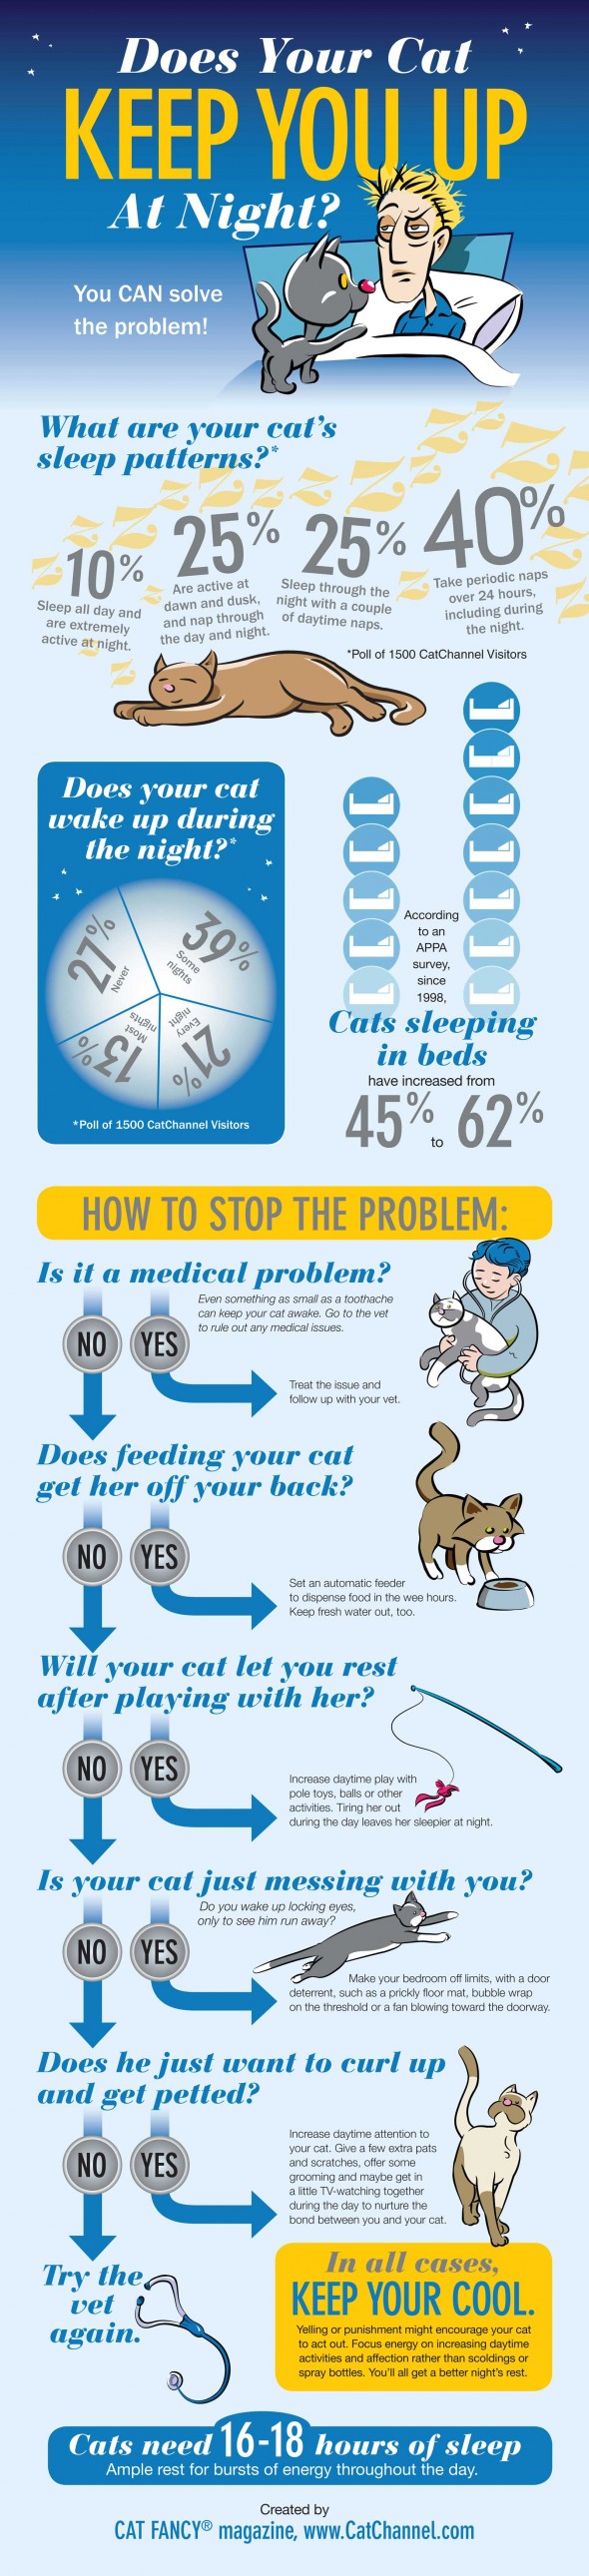 Does Your Cat Keep You Up at Night?